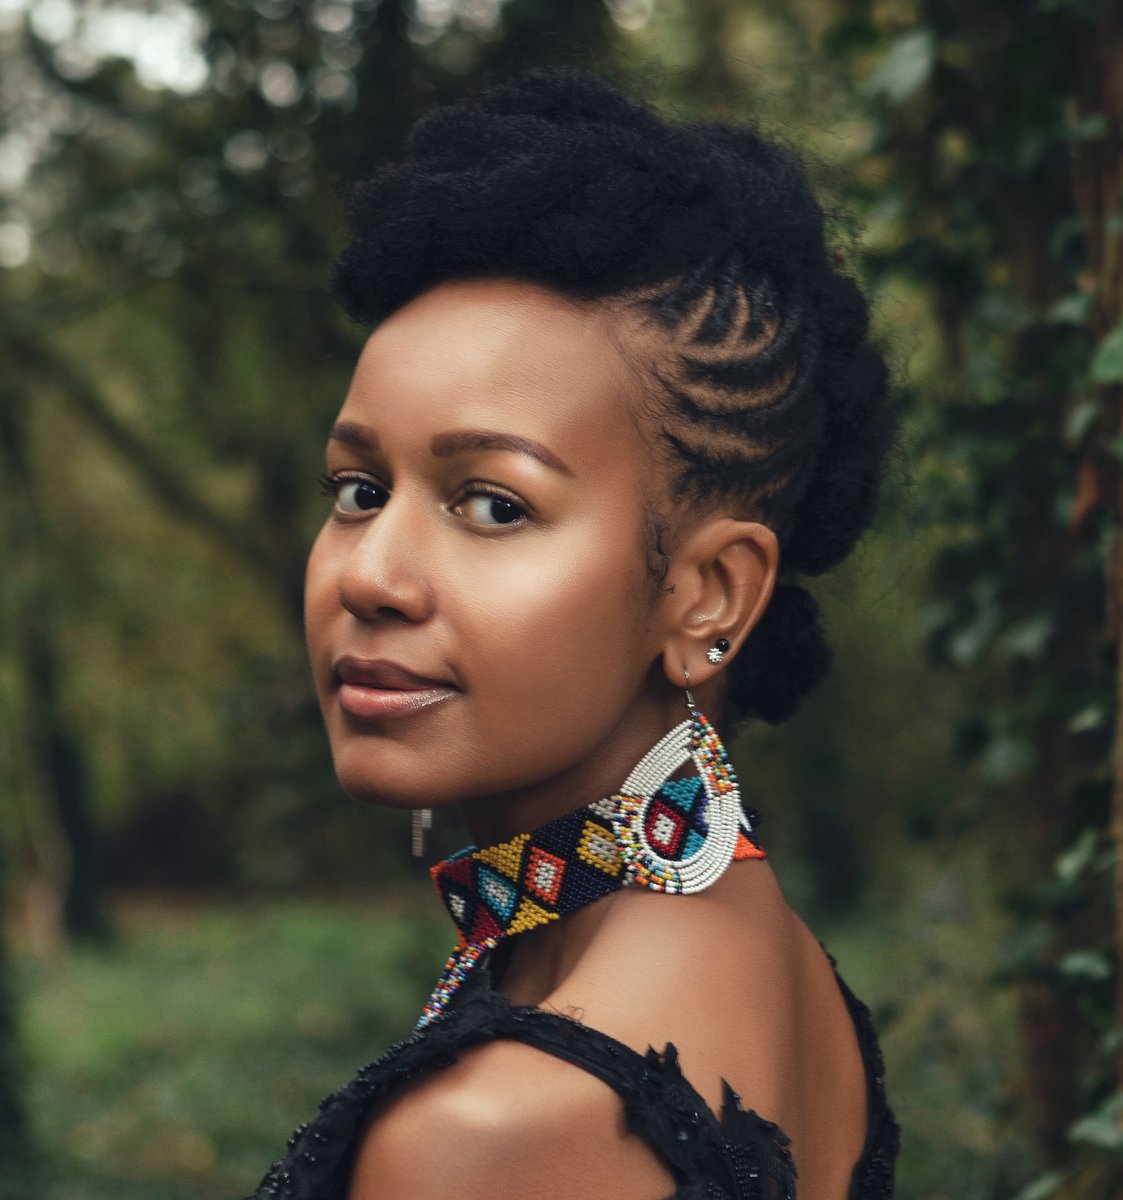 13. Rehema Cultural Arts
With a focus on social justice, their latest project Ode to the Ancestors celebrates black contribution to archaeology & conservation in Kenya & is currently at Horniman Museum.
Led by Sherry Davis
#PositiveImpact #dbMadeForGood #DBACE2023 #SocEnt 
13/20